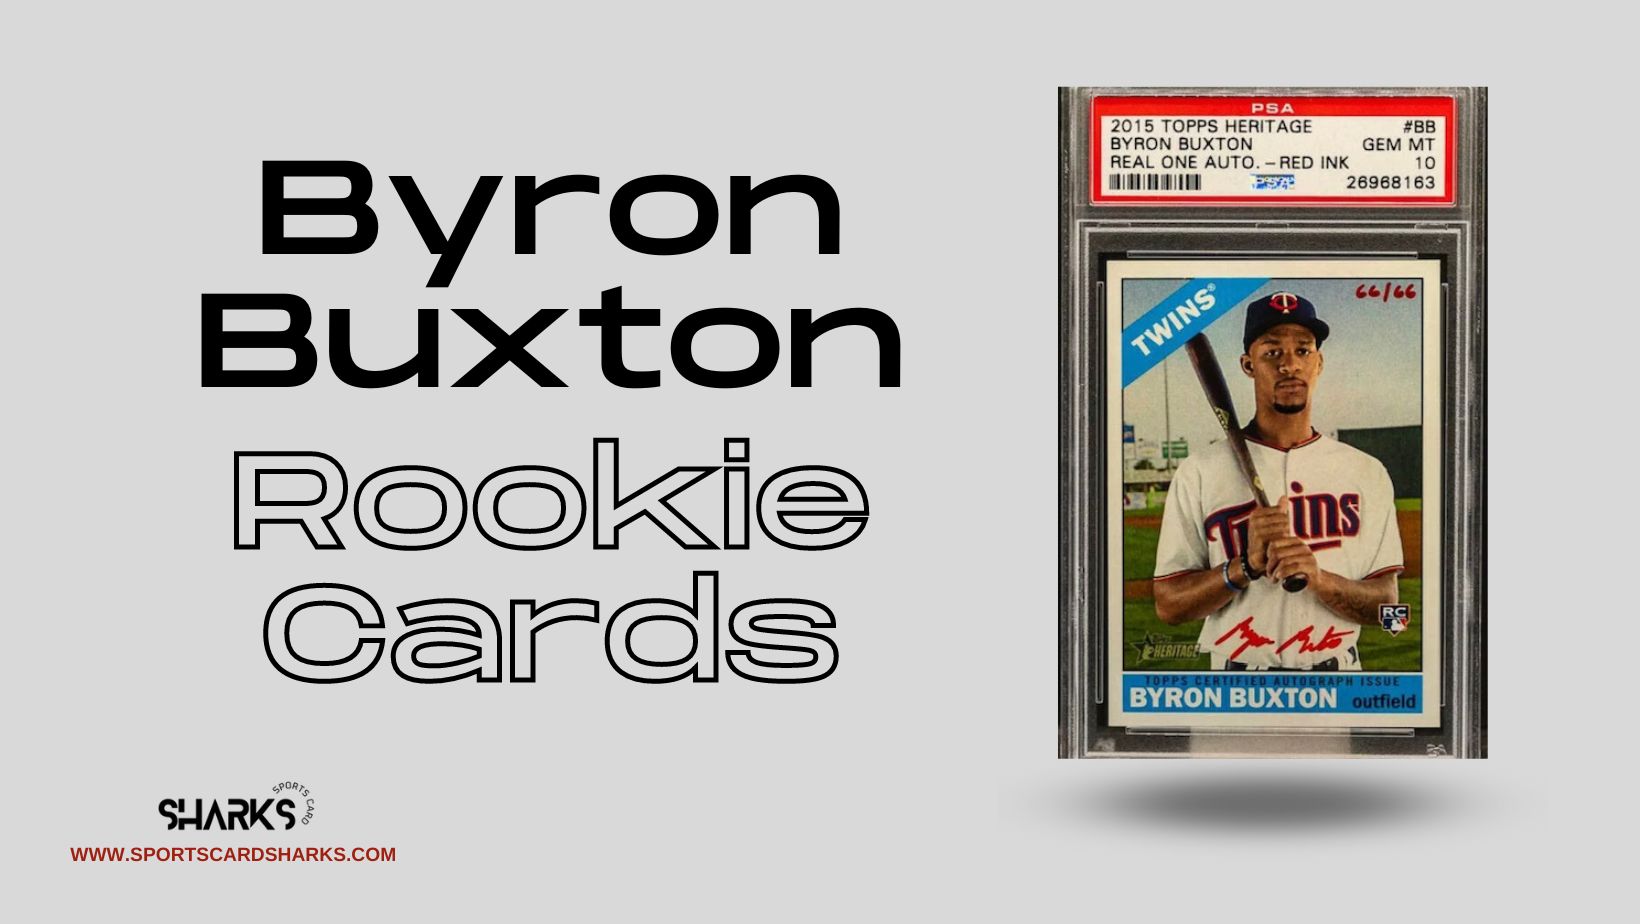 Featured image for the Best Byron Buxton Rookie Cards blog post on Sports Card Sharks